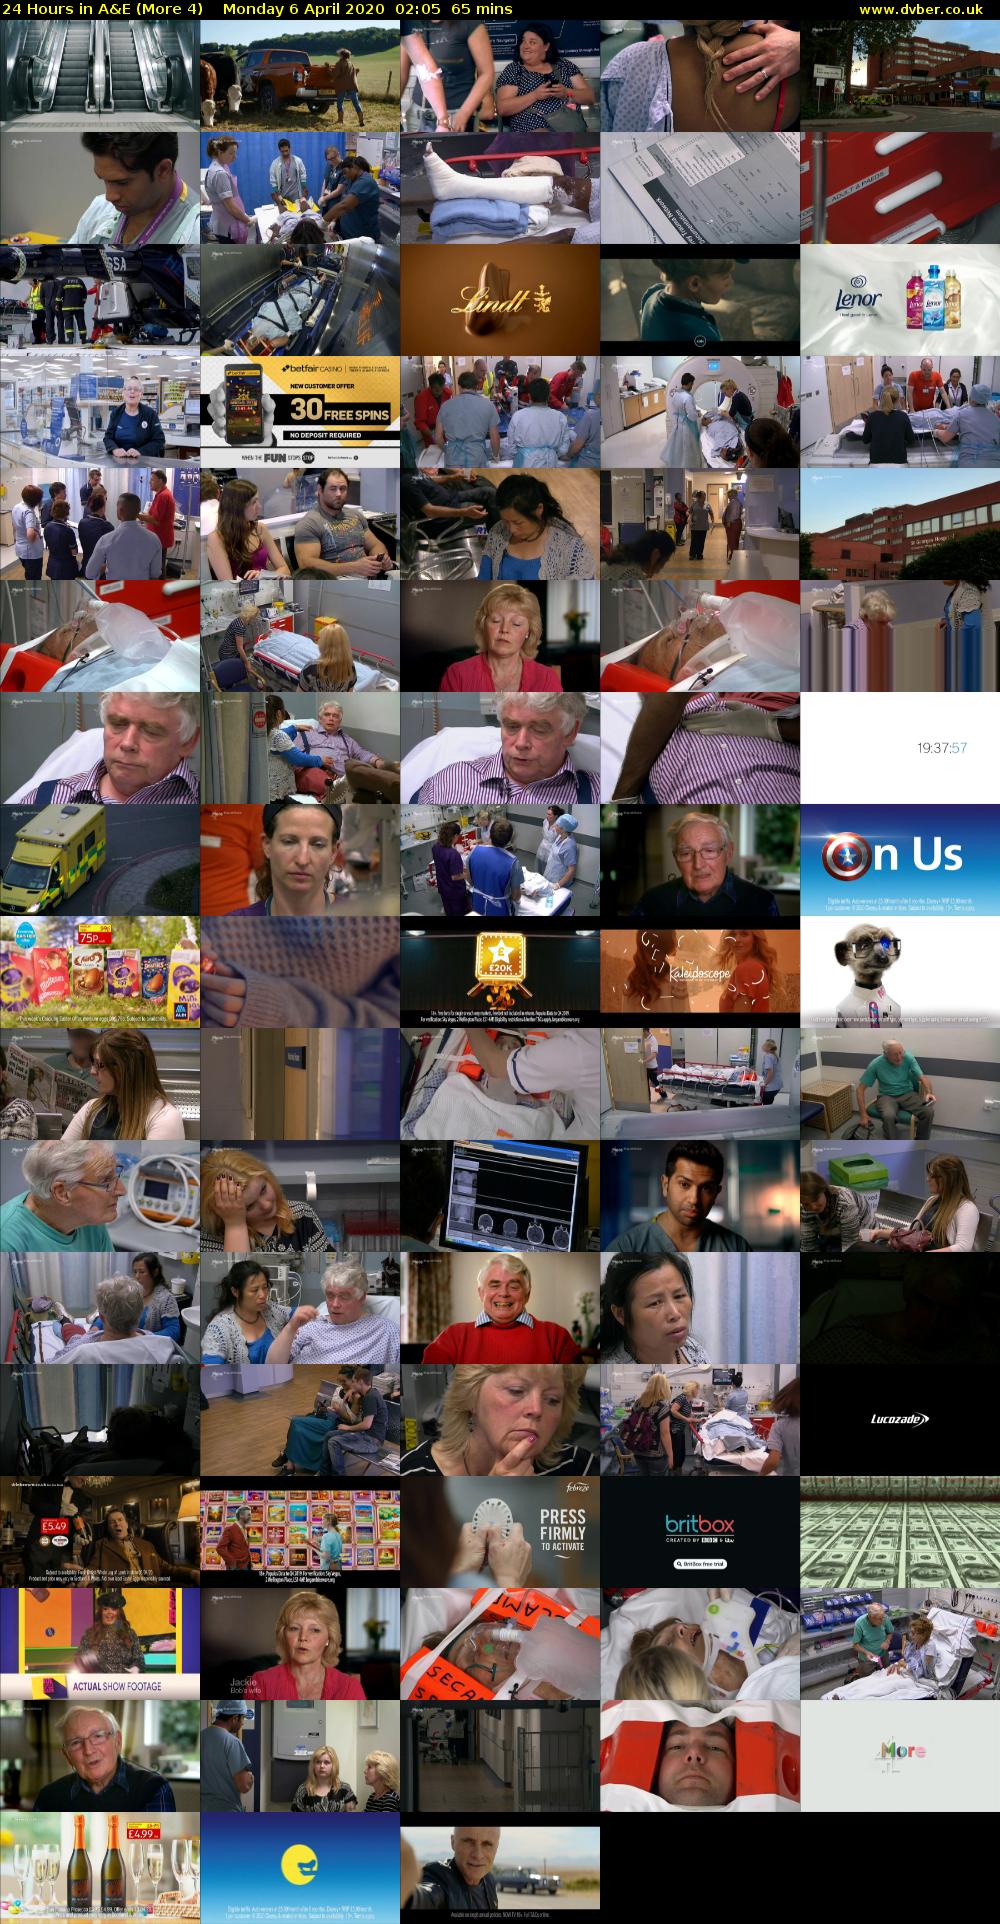 24 Hours in A&E (More 4) Monday 6 April 2020 02:05 - 03:10